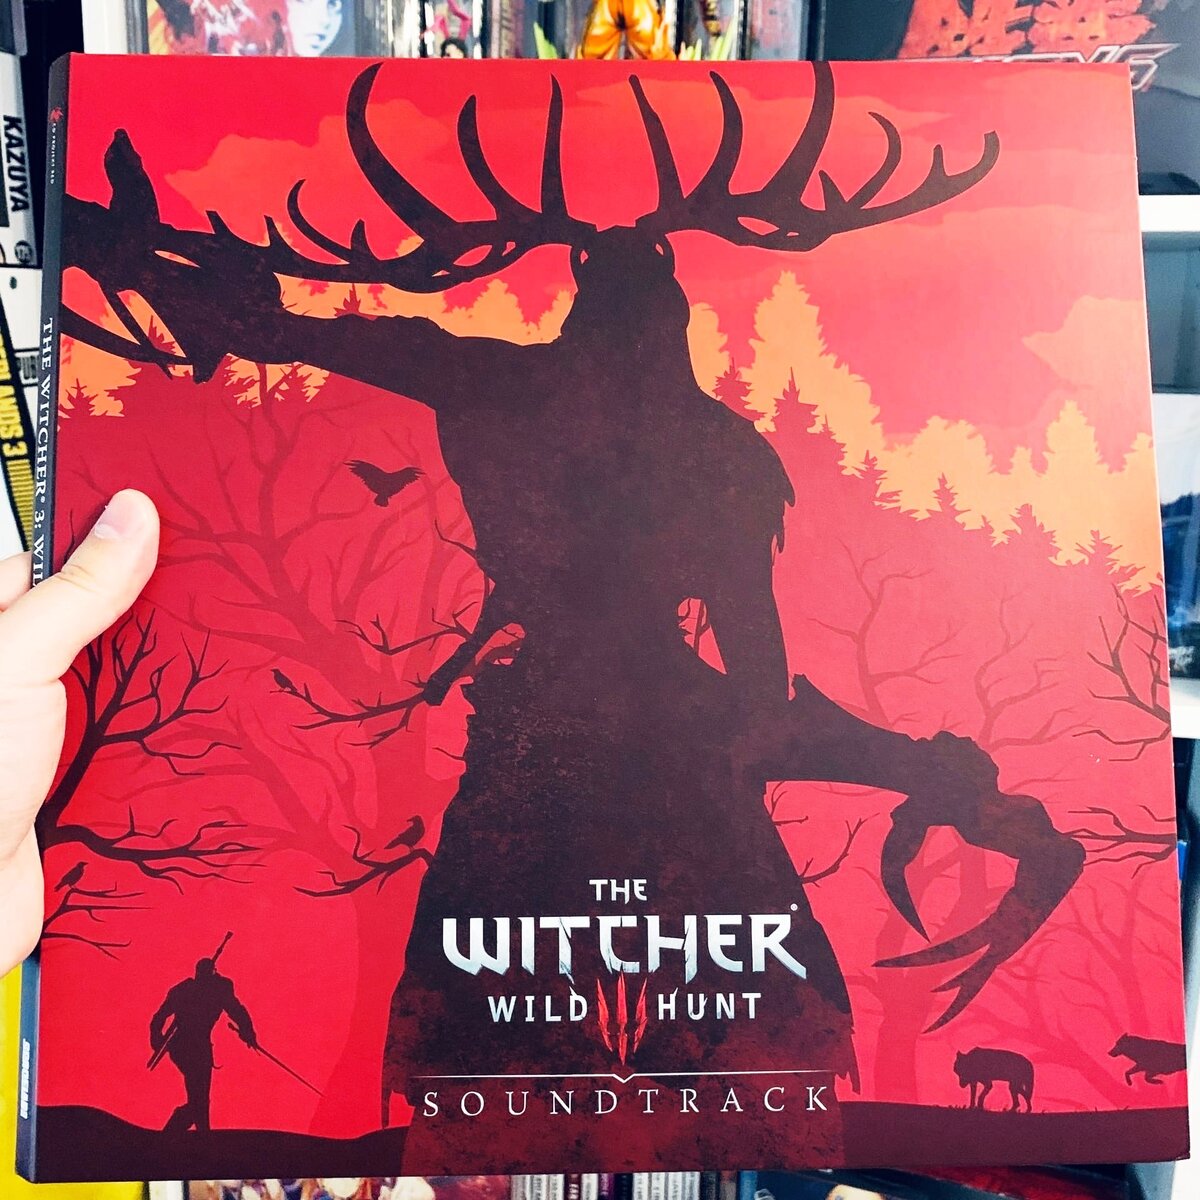 The witcher 3 soundtrack by фото 22